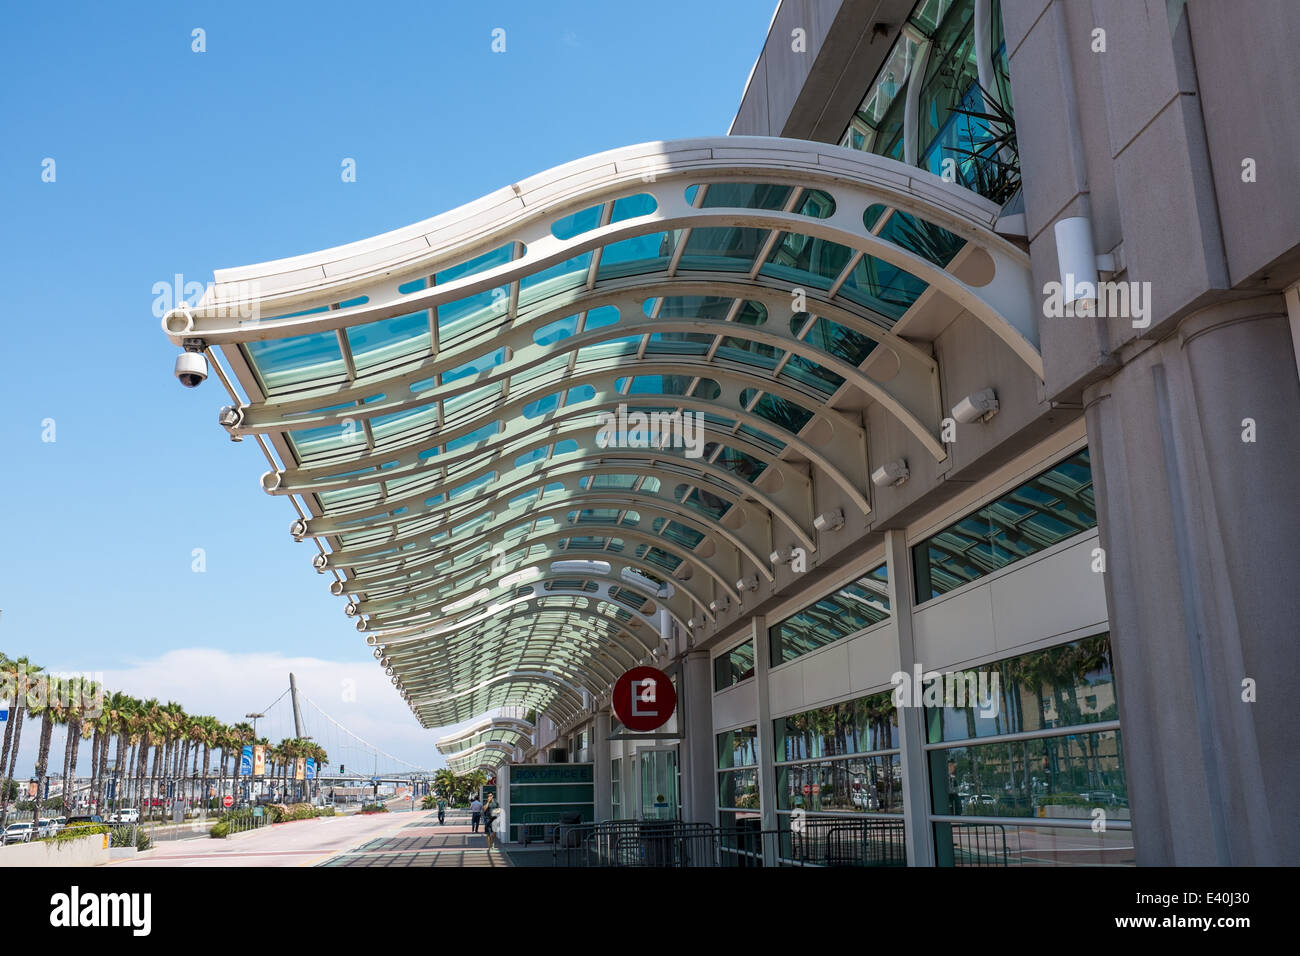 Curved glass roof at entrance to San Diego Convention Center, California, USA Stock Photo